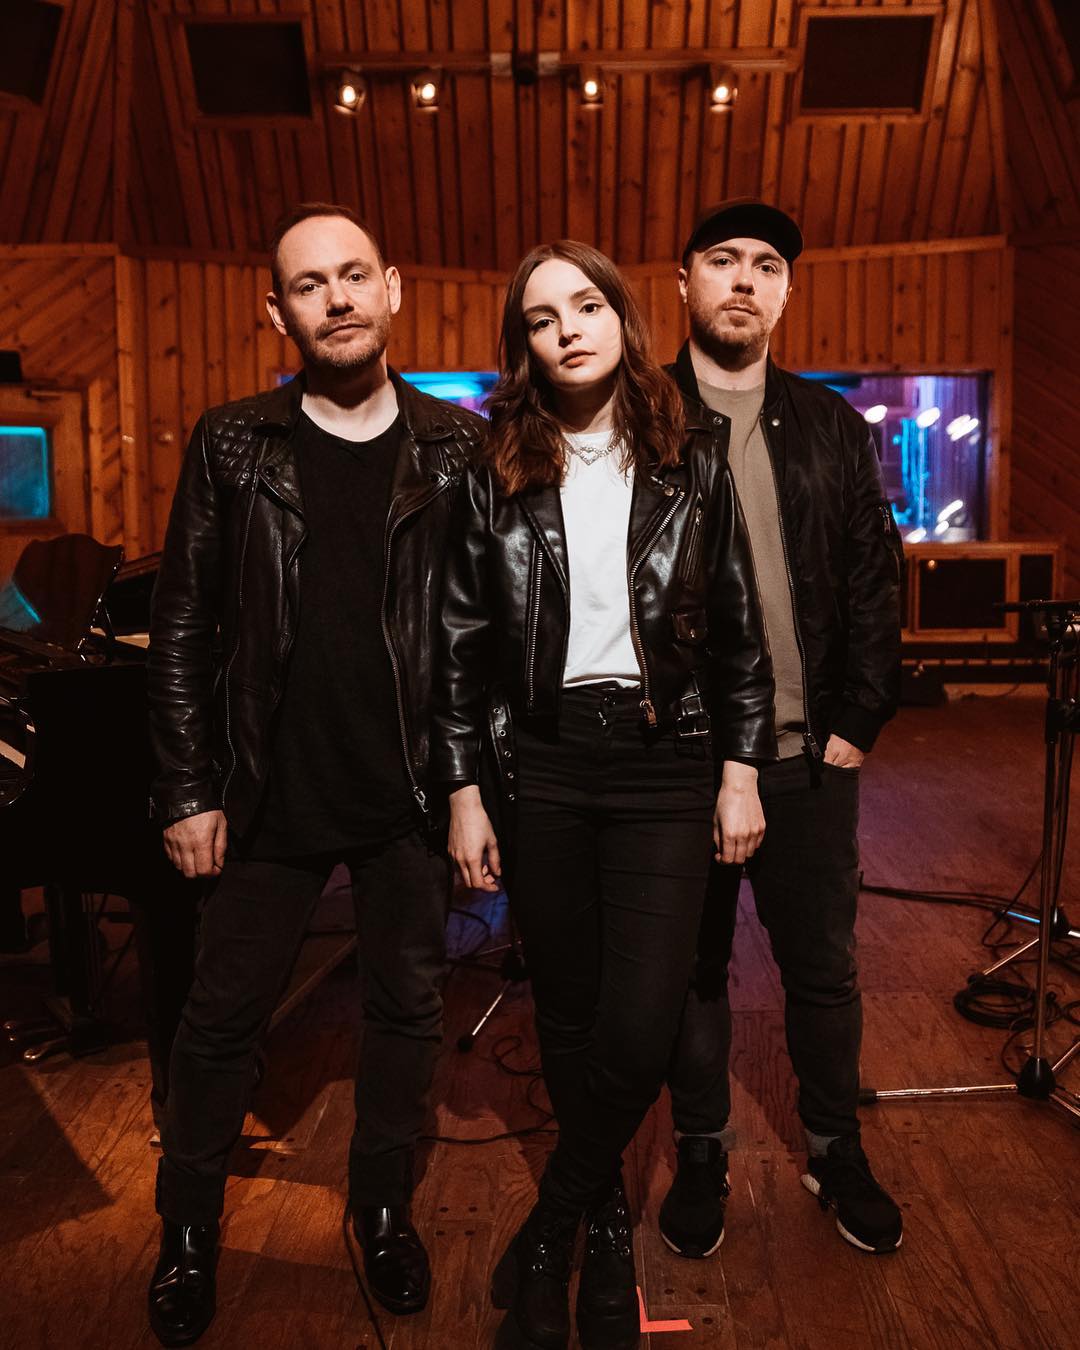 Watch CHVRCHES’ Beautiful Acoustic Session on the Honda Stage at Power Station